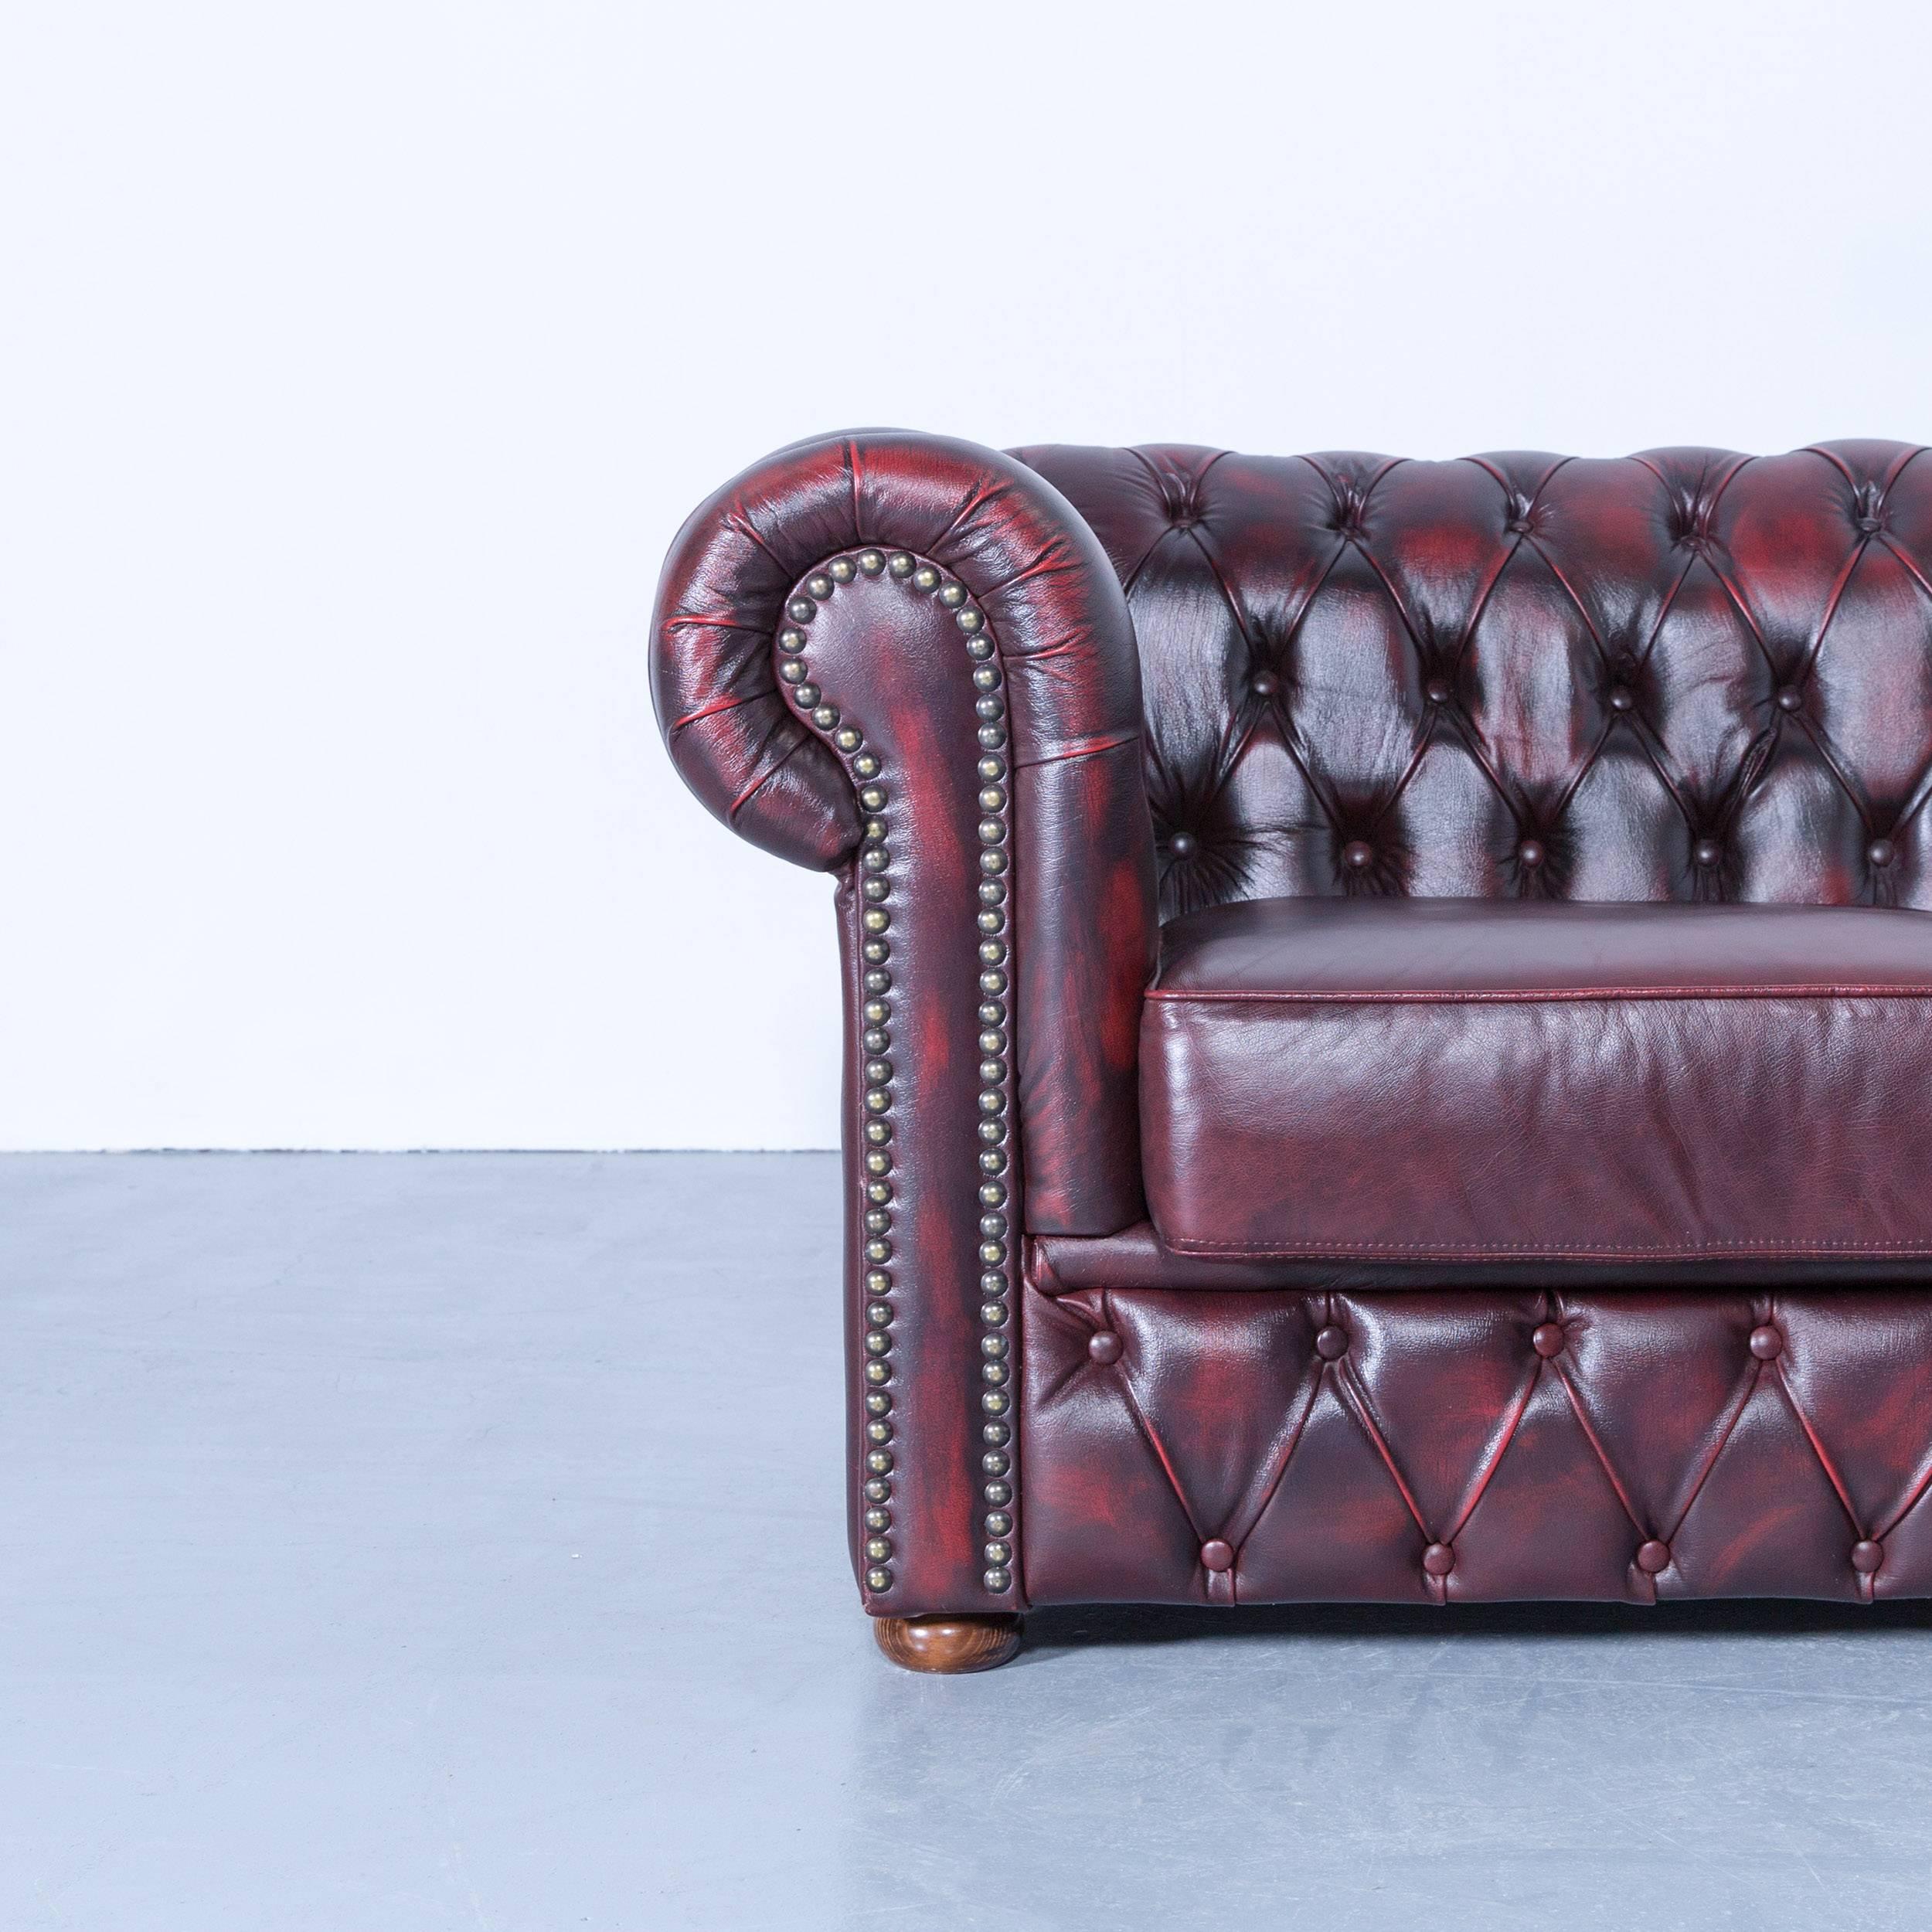 Rochester Chesterfield Corner Sofa Oxblood Red Leather Couch Vintage Rivets, made for pure comfort.